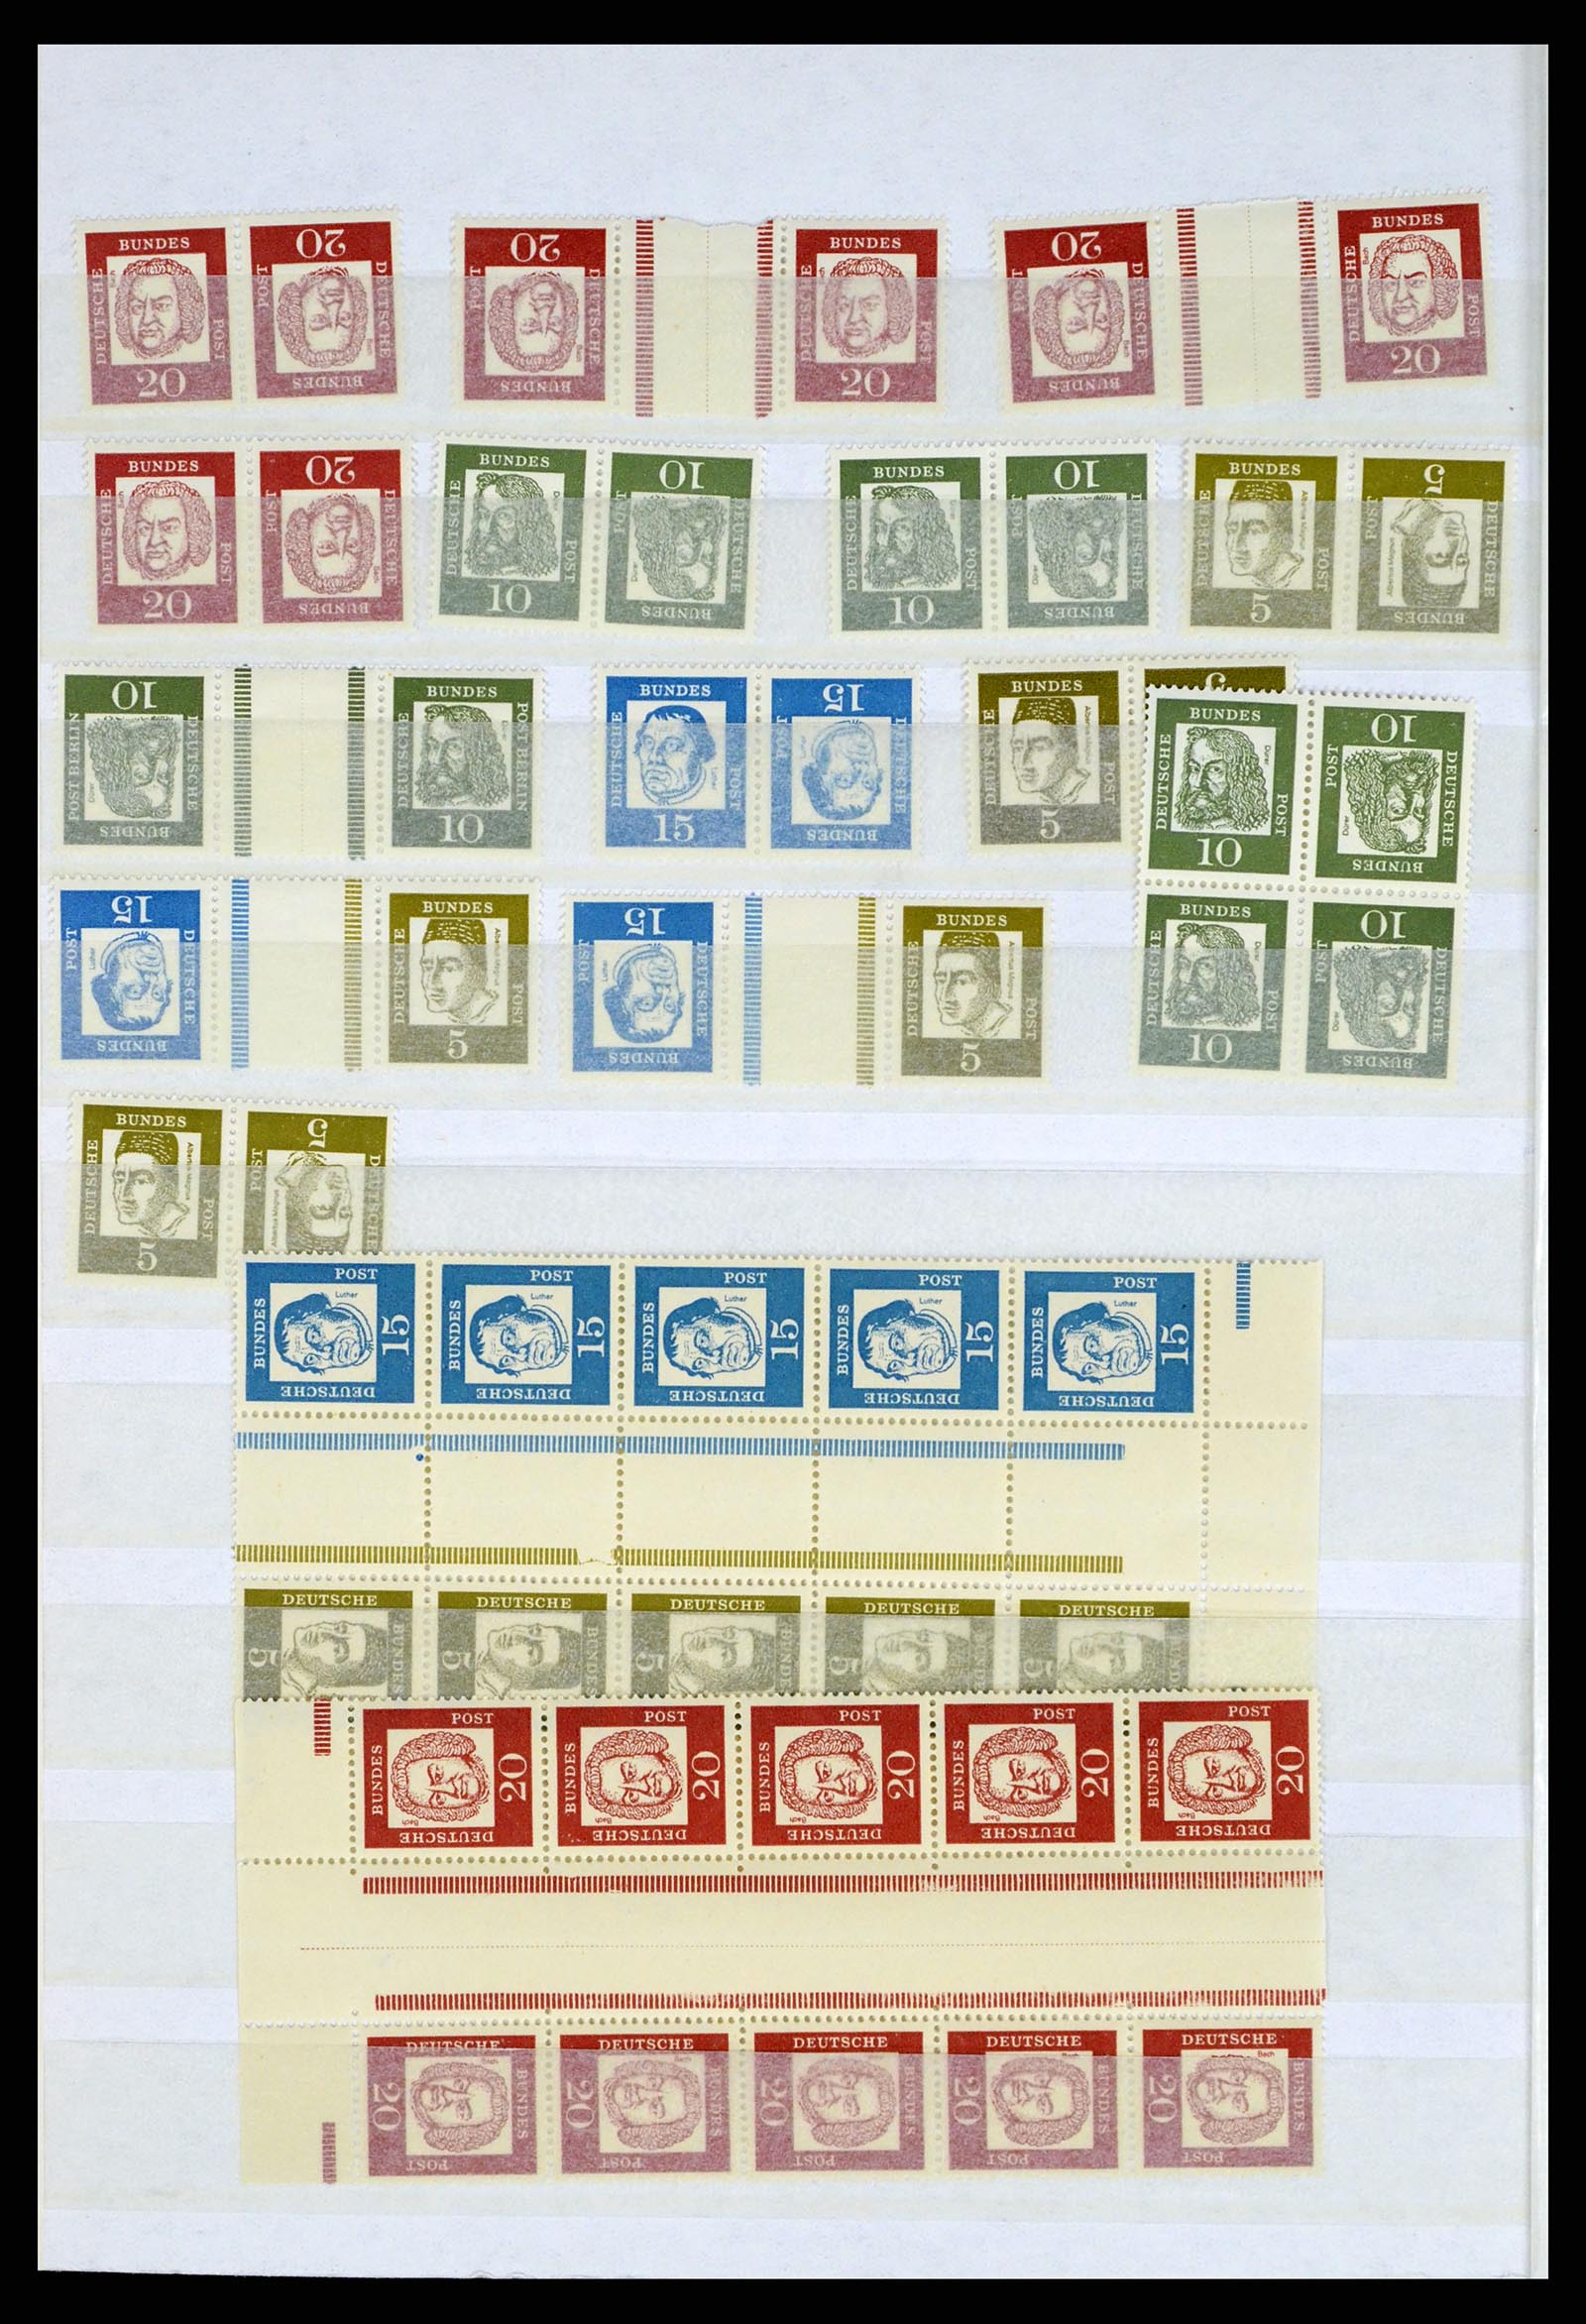 37354 054 - Stamp collection 37354 Bundespost and Berlin 1955-2000.